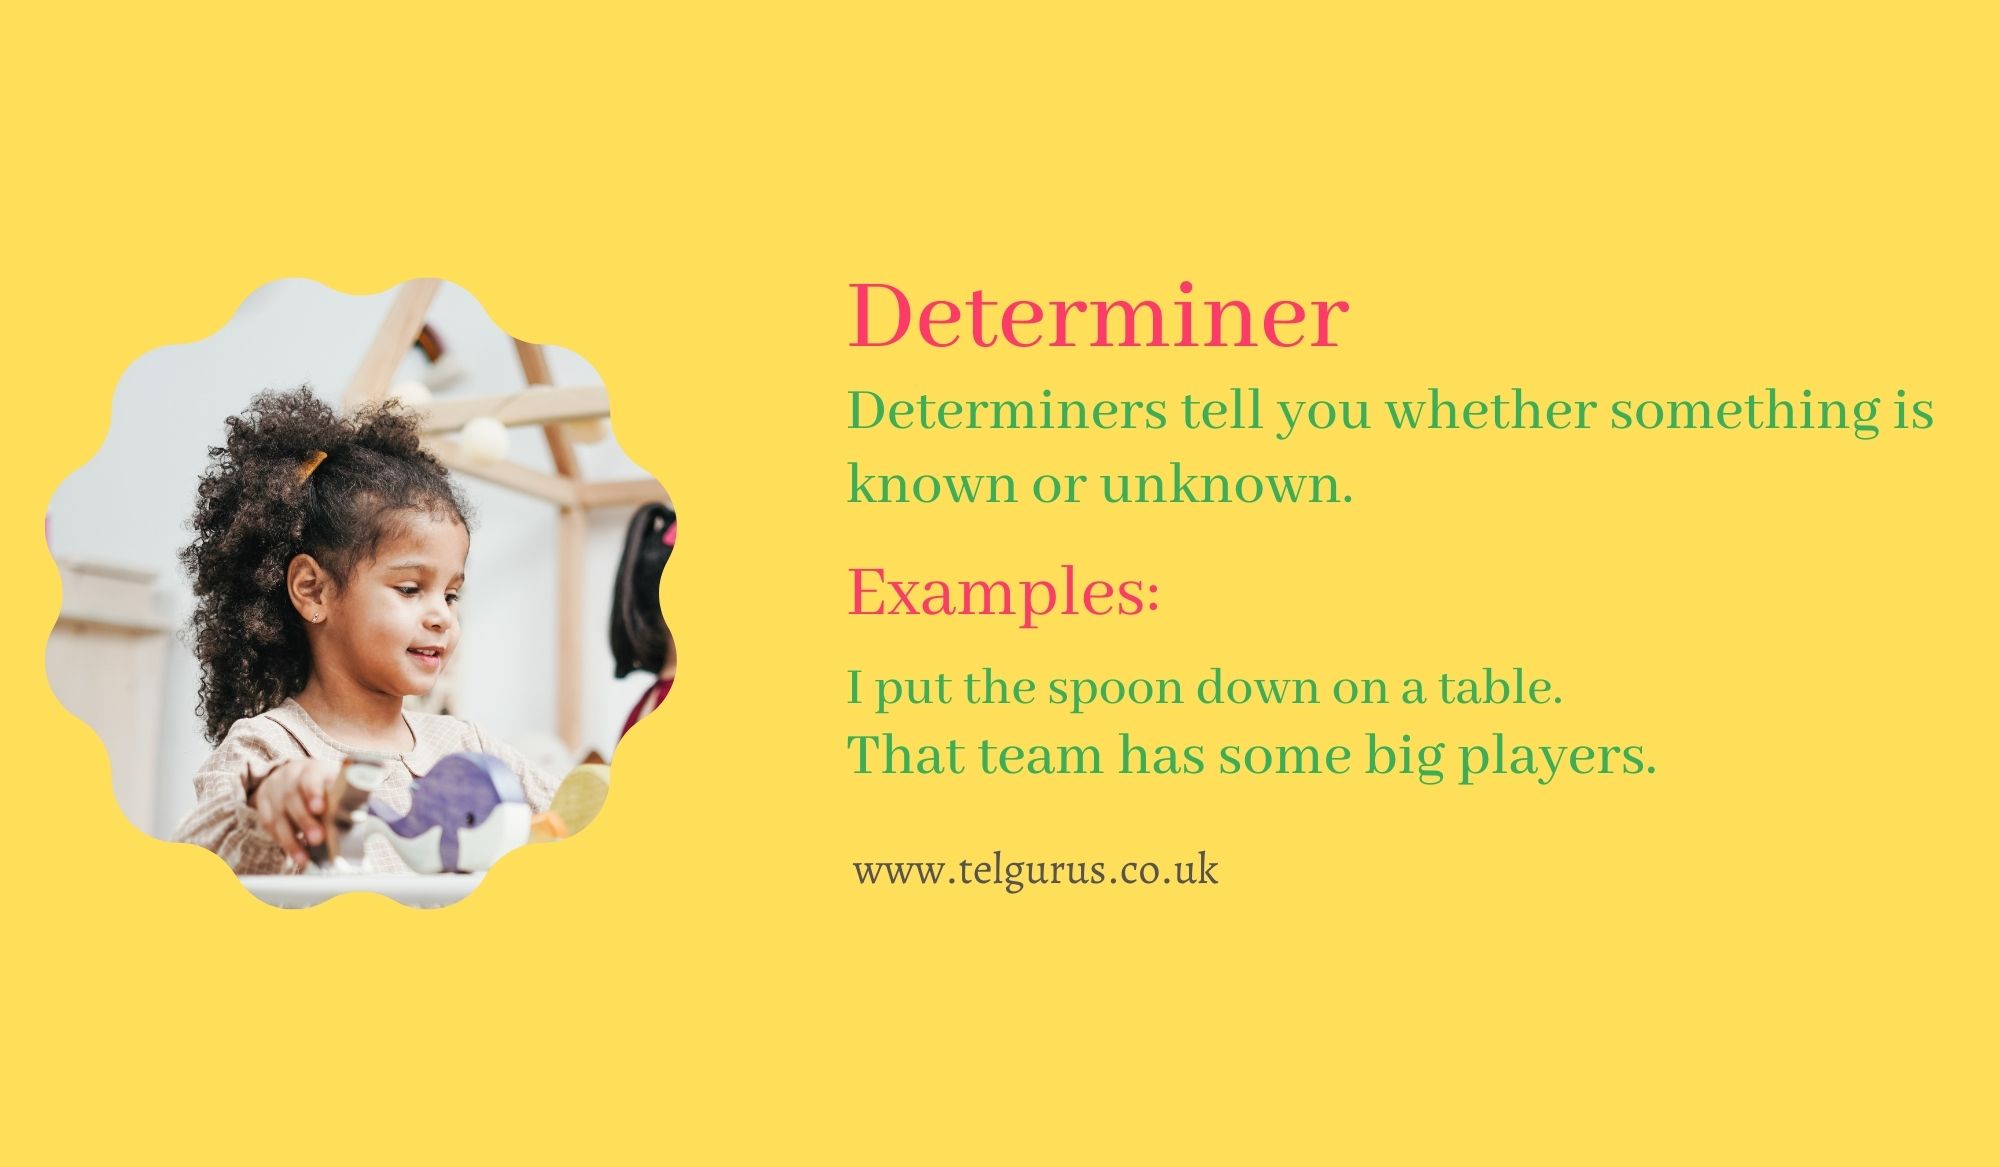 What is a determiner in English?